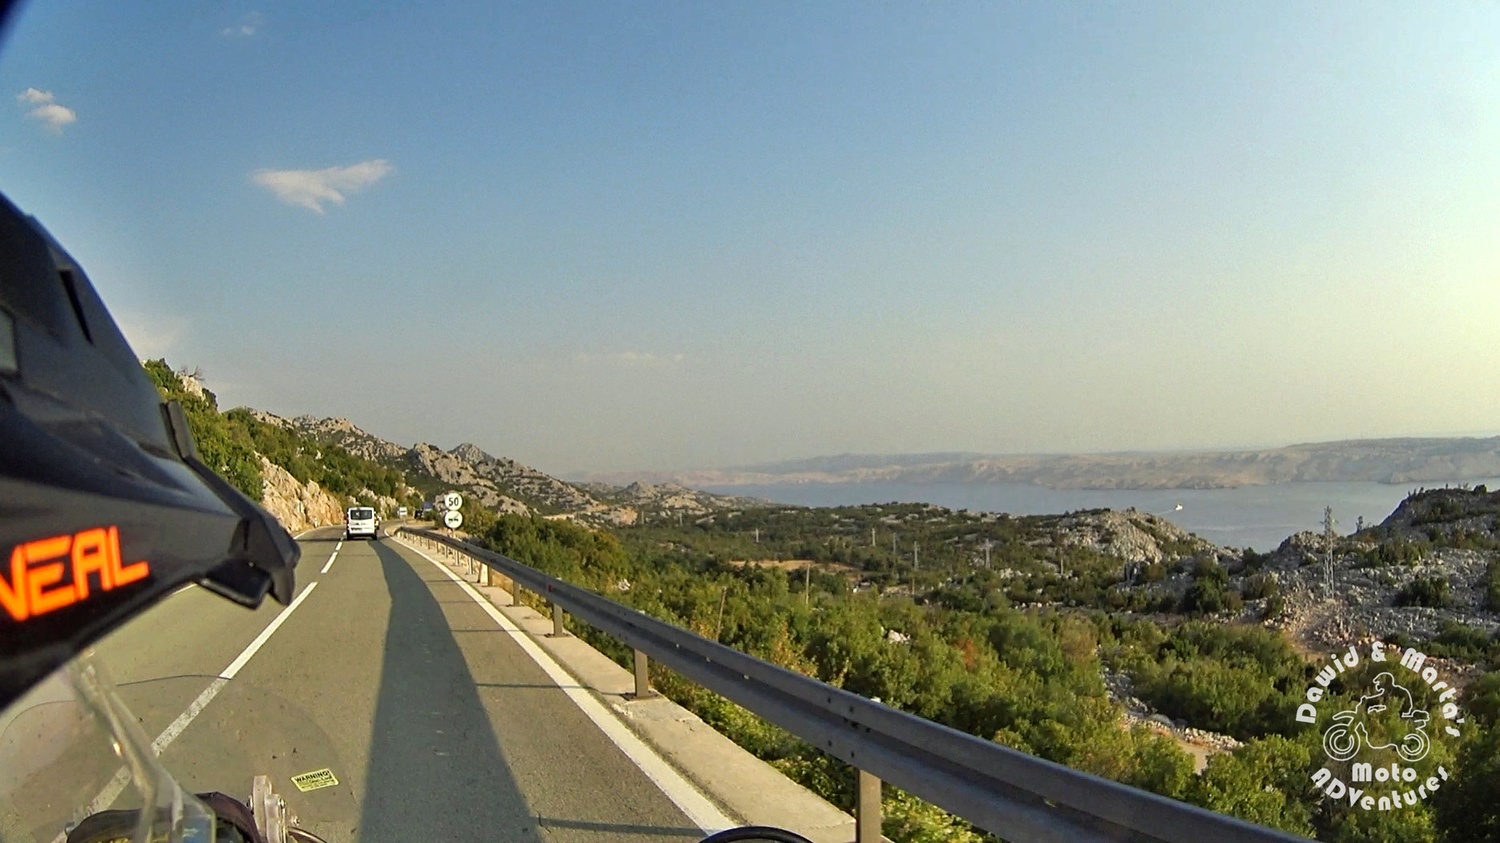 The Pag Island on the horizon - view from the E65 Adriatic Highway.jpg